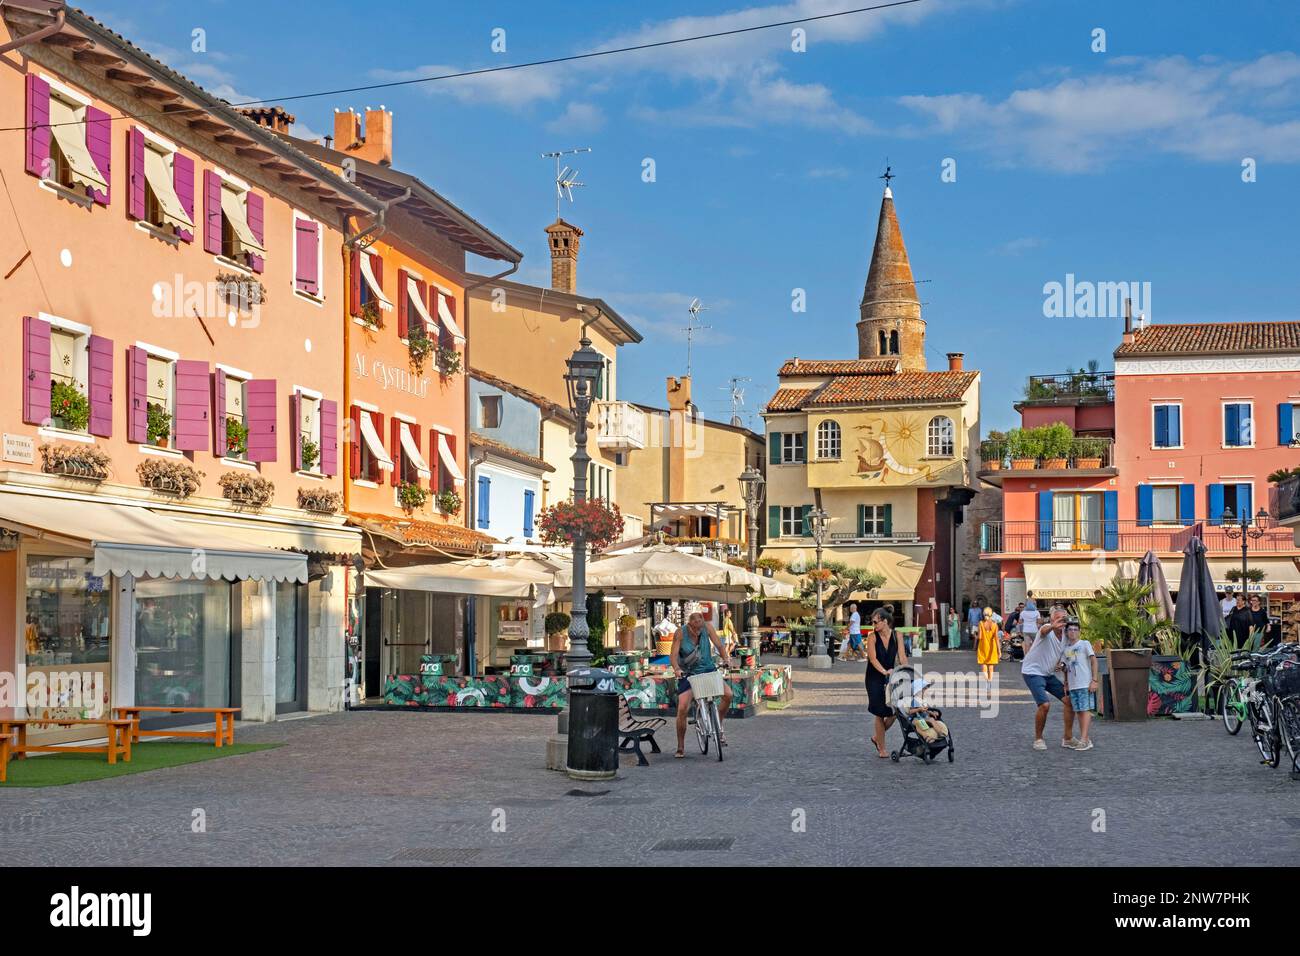 Square in the historic city centre of Caorle, coastal town in the Metropolitan City of Venice, Veneto, Northern Italy Stock Photo